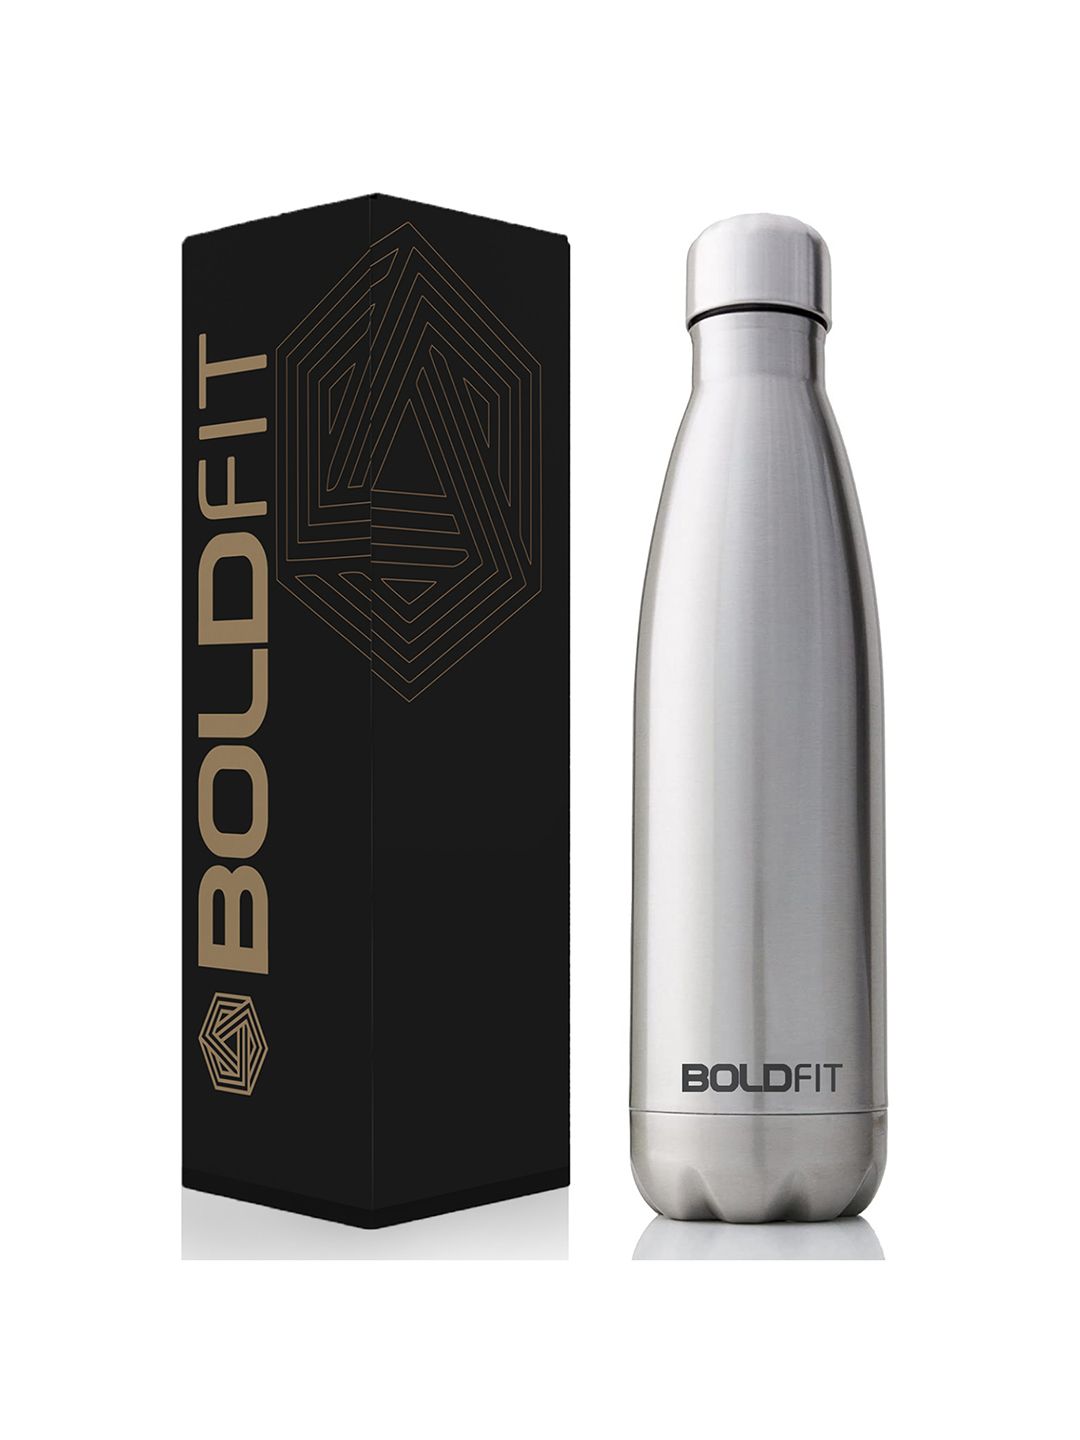 BOLDFIT Silver-Toned Stainless Steel Water Bottle Price in India